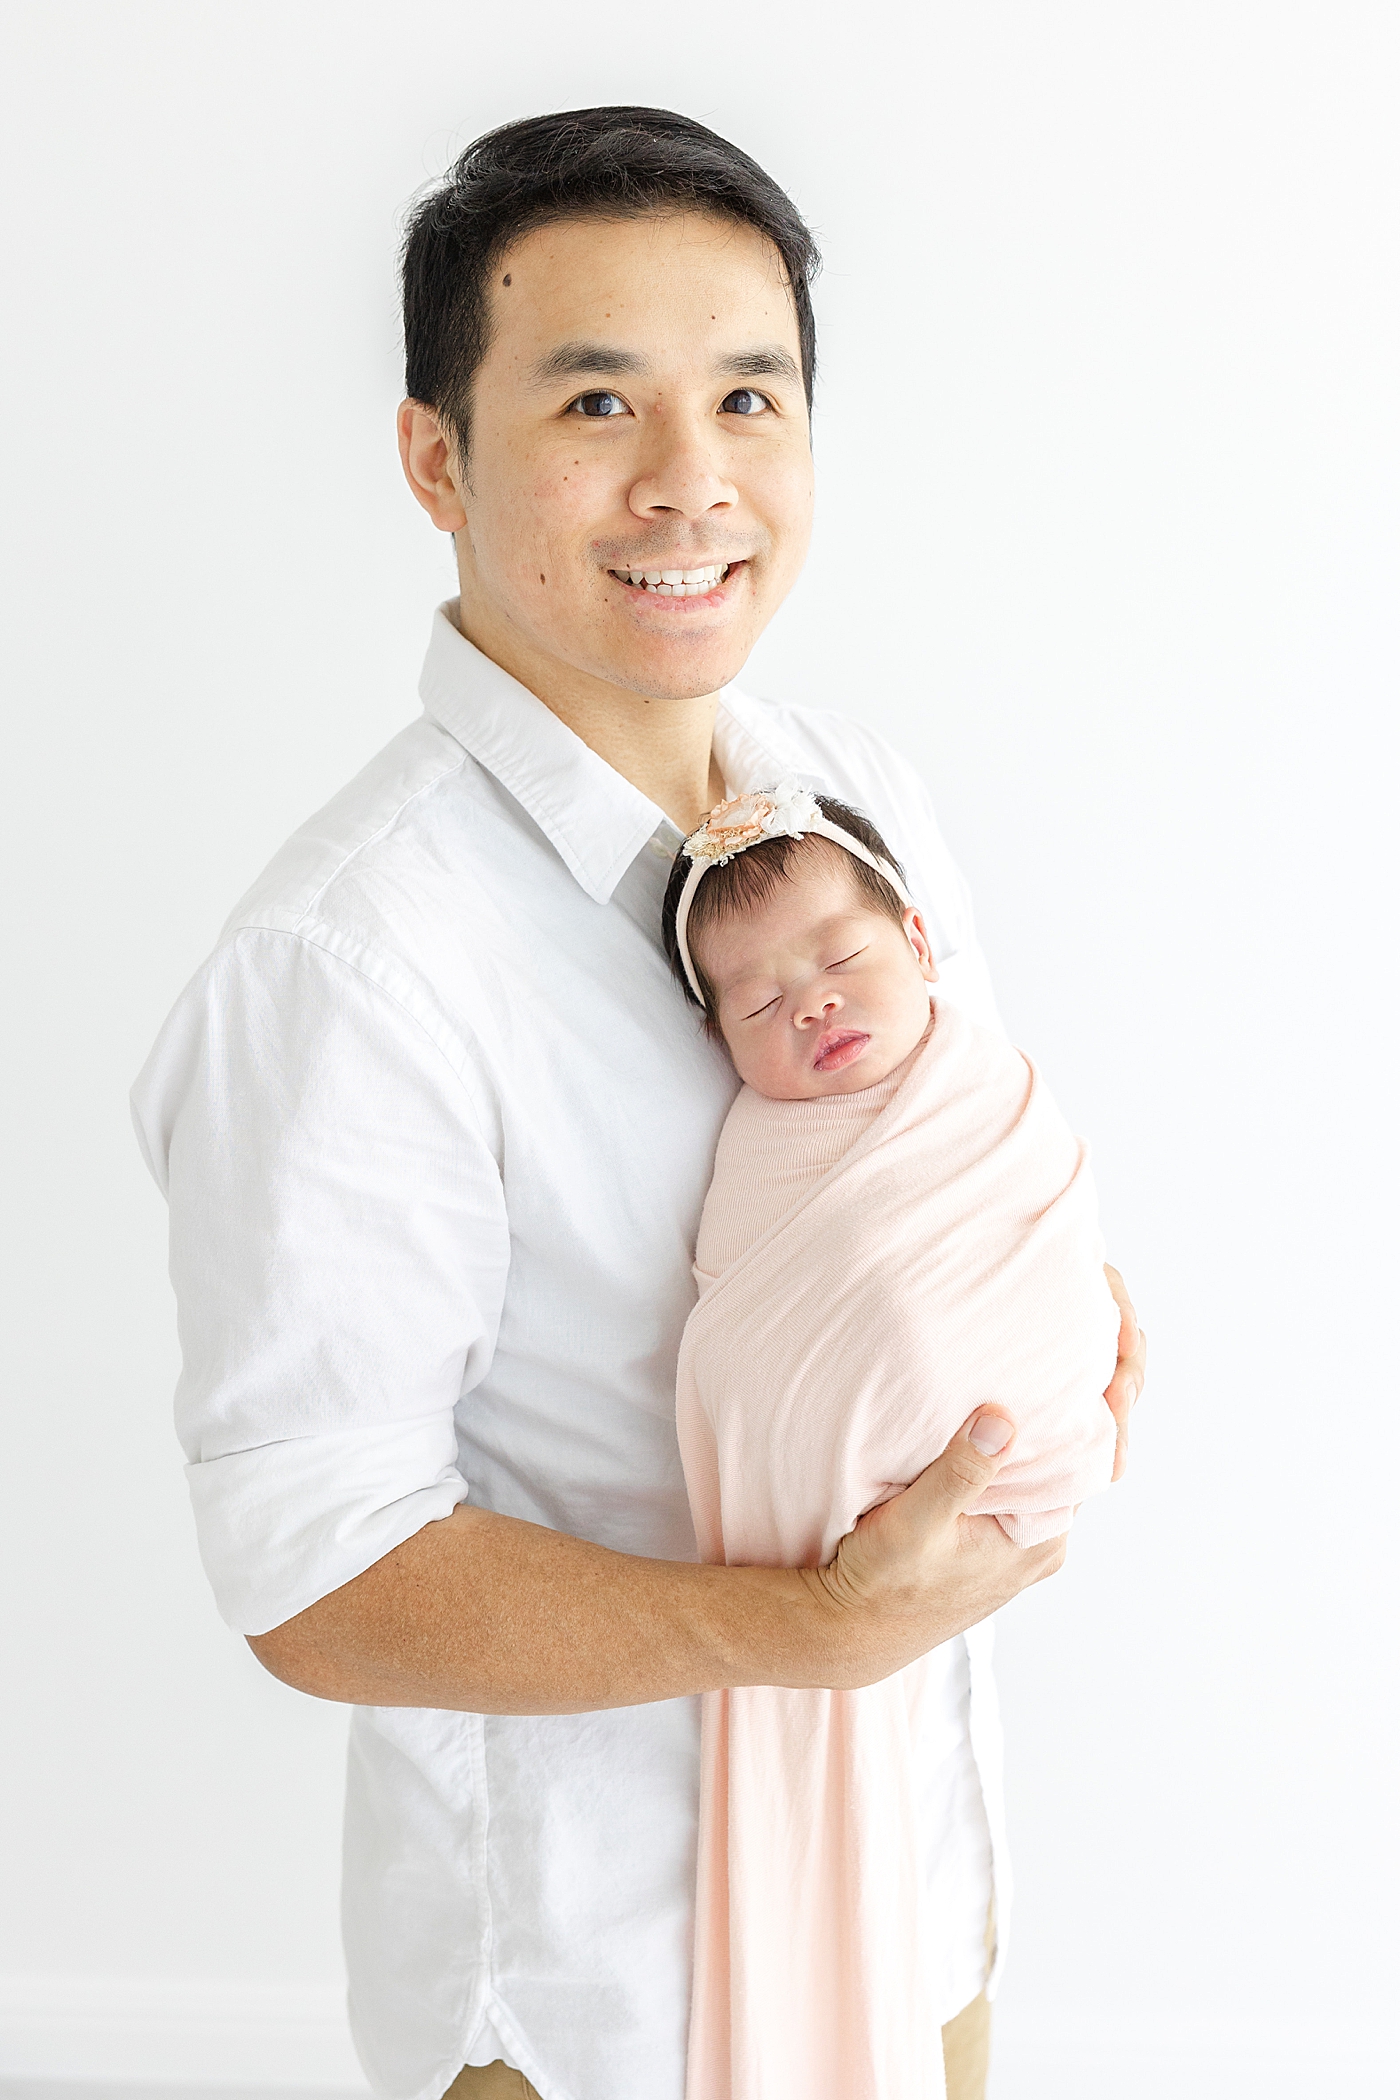 Dad smiling holding his new baby during her Newborn sessions with siblings | Image by Sana Ahmed